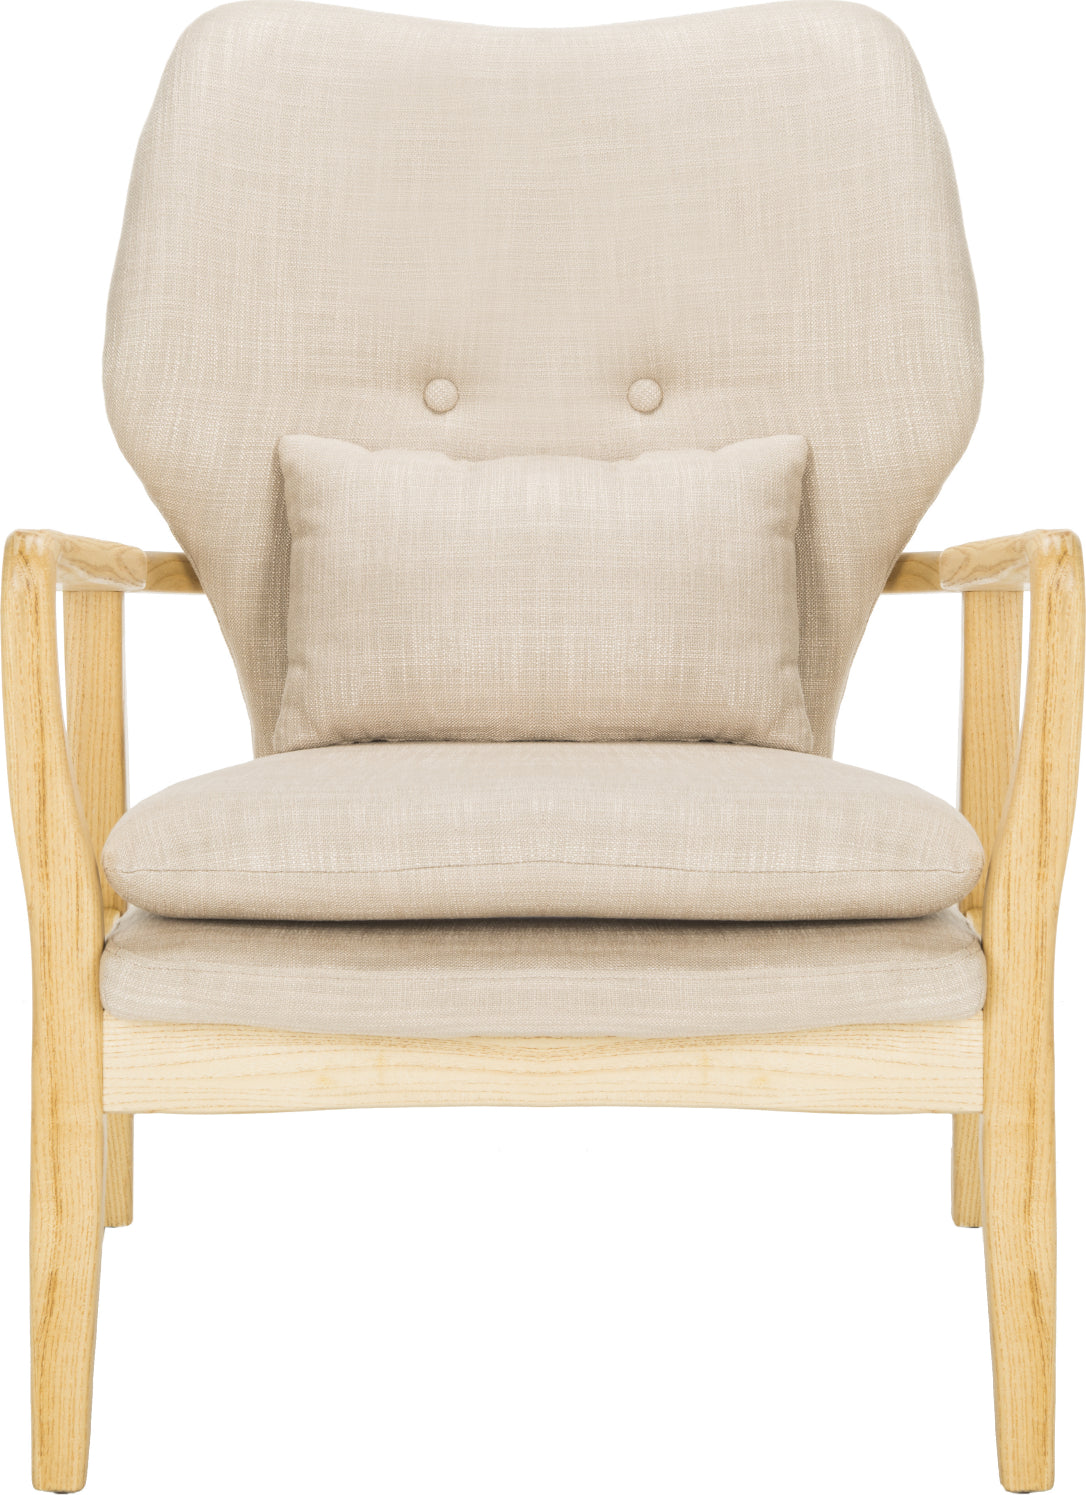 Safavieh Tarly Accent Chair Beige and Natural Furniture main image